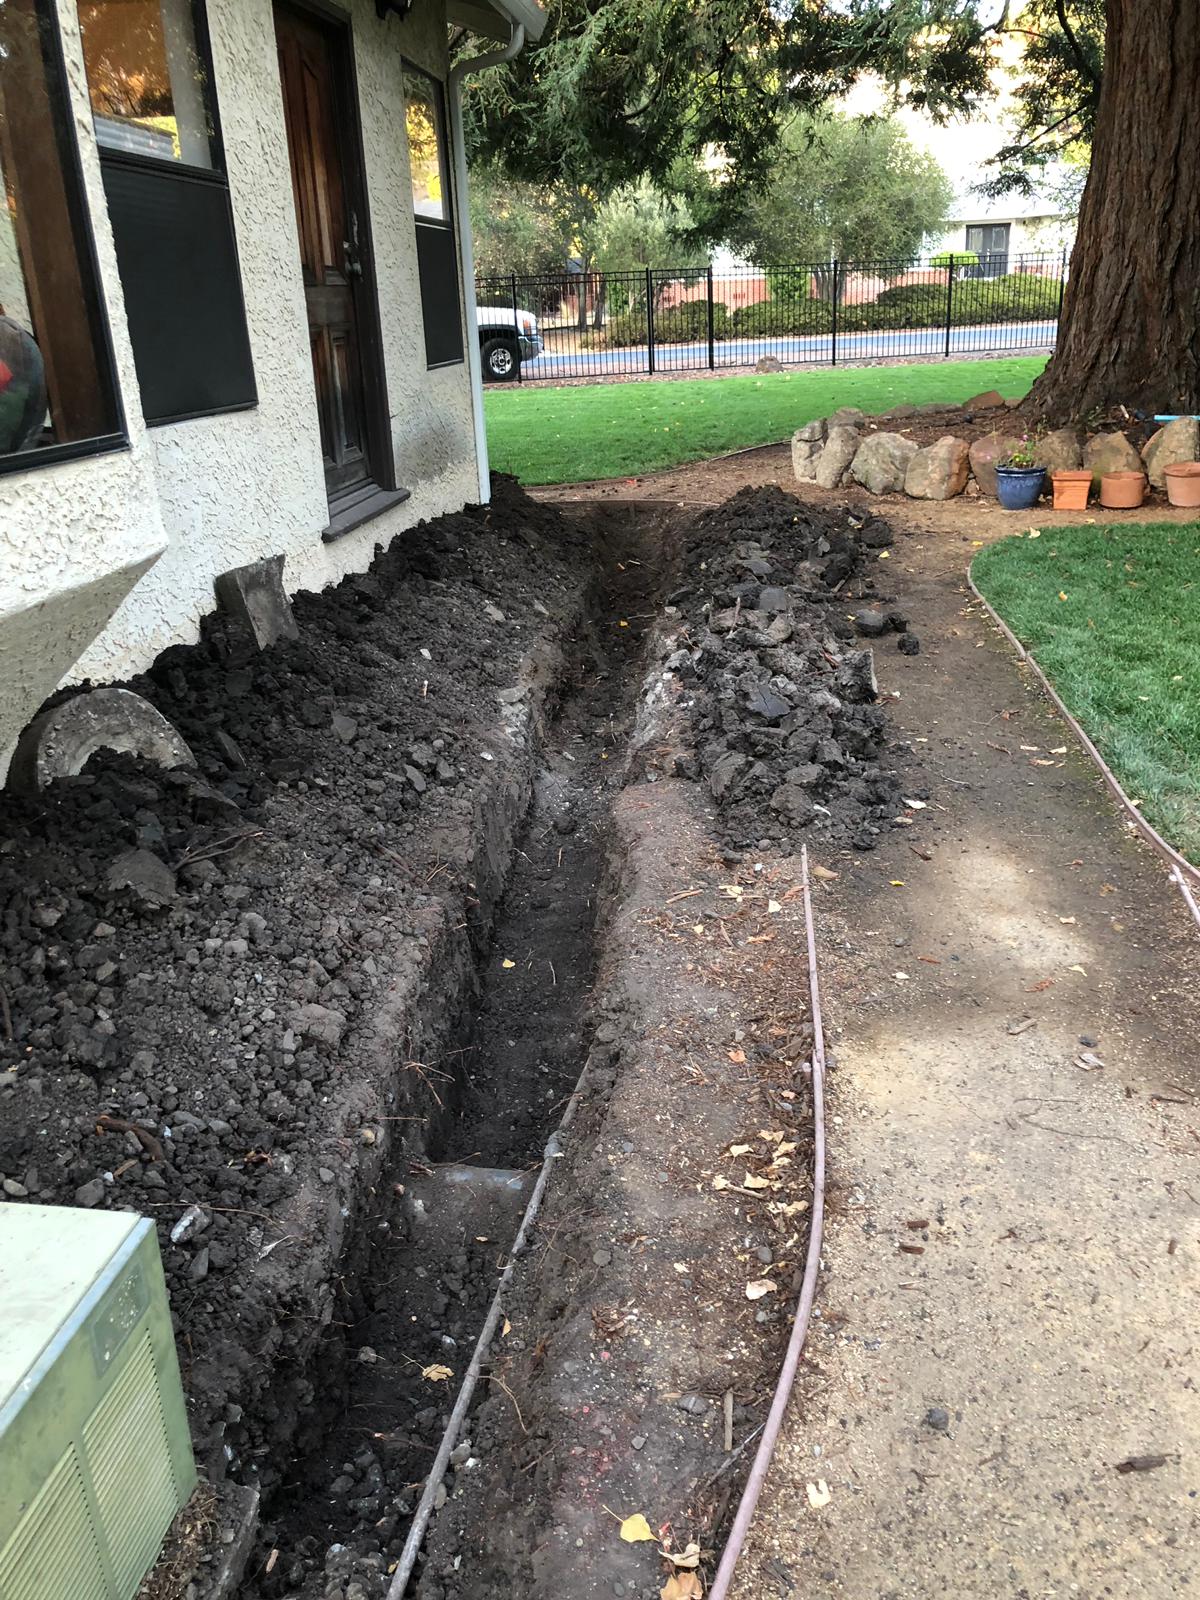  French drain repairs being done to a home.  